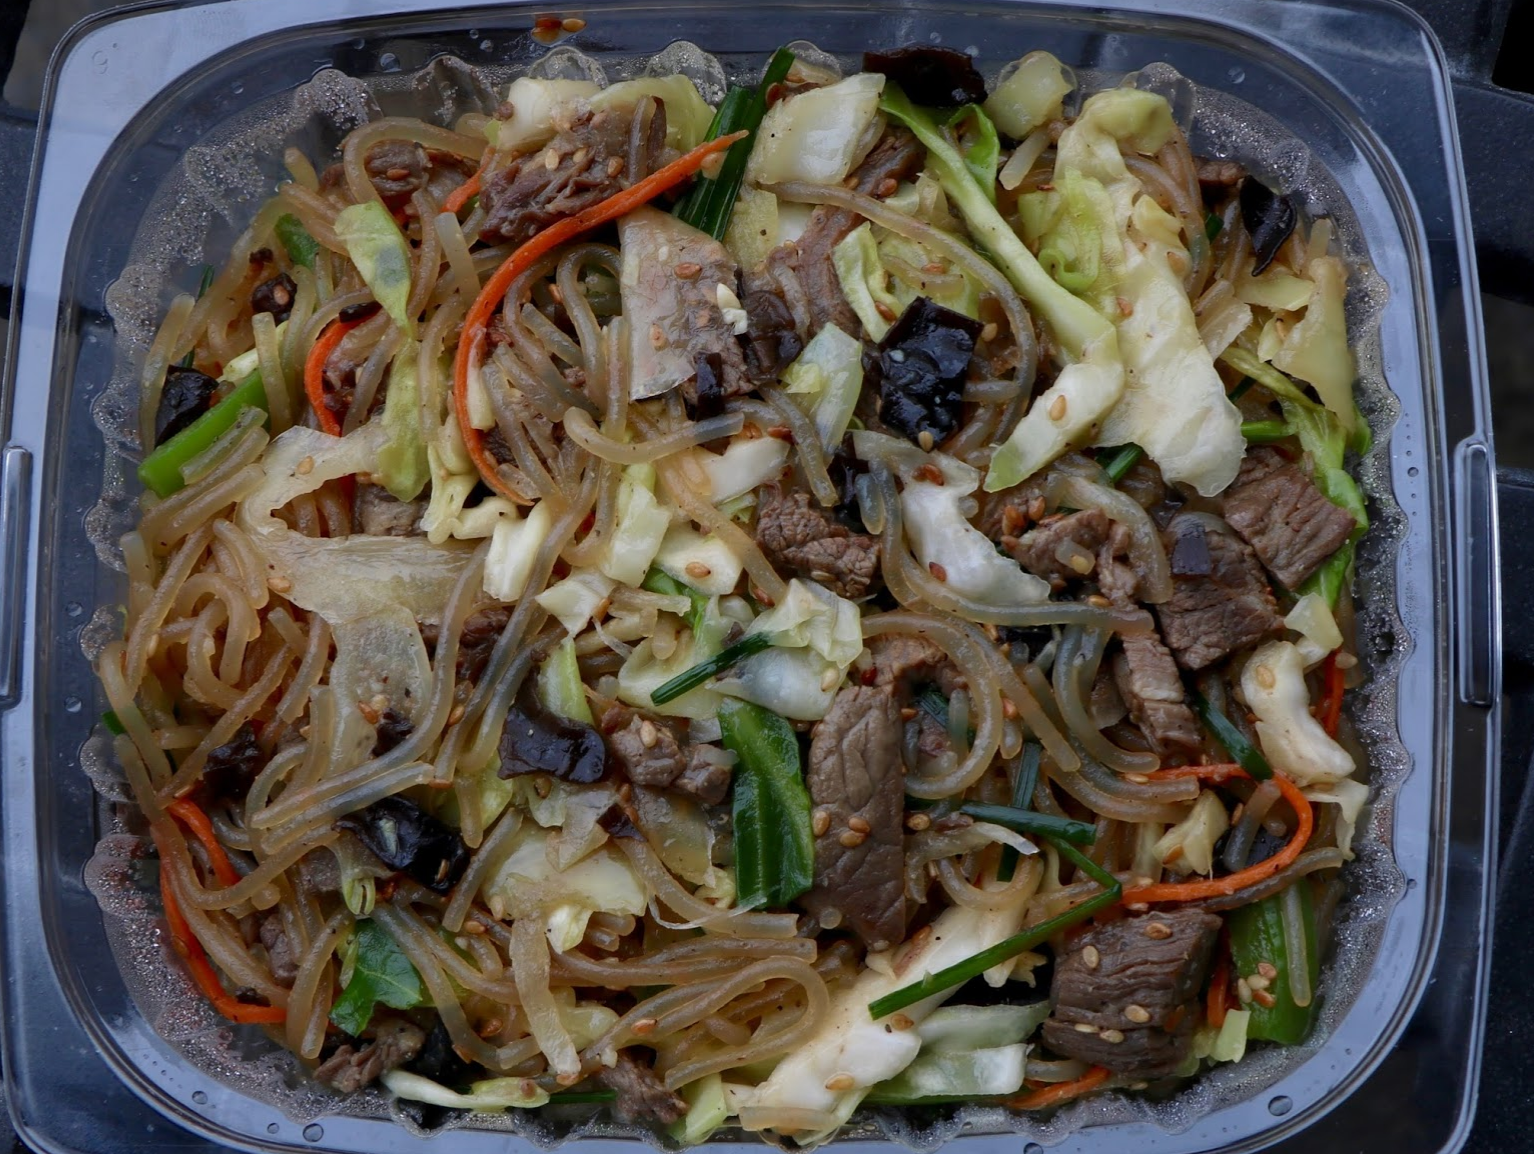 Japchae is a dish composed of cellophane noodles with a soy sauce and sesame oil sauce. Credit: Abigail Massar / The Foothill Dragon Press